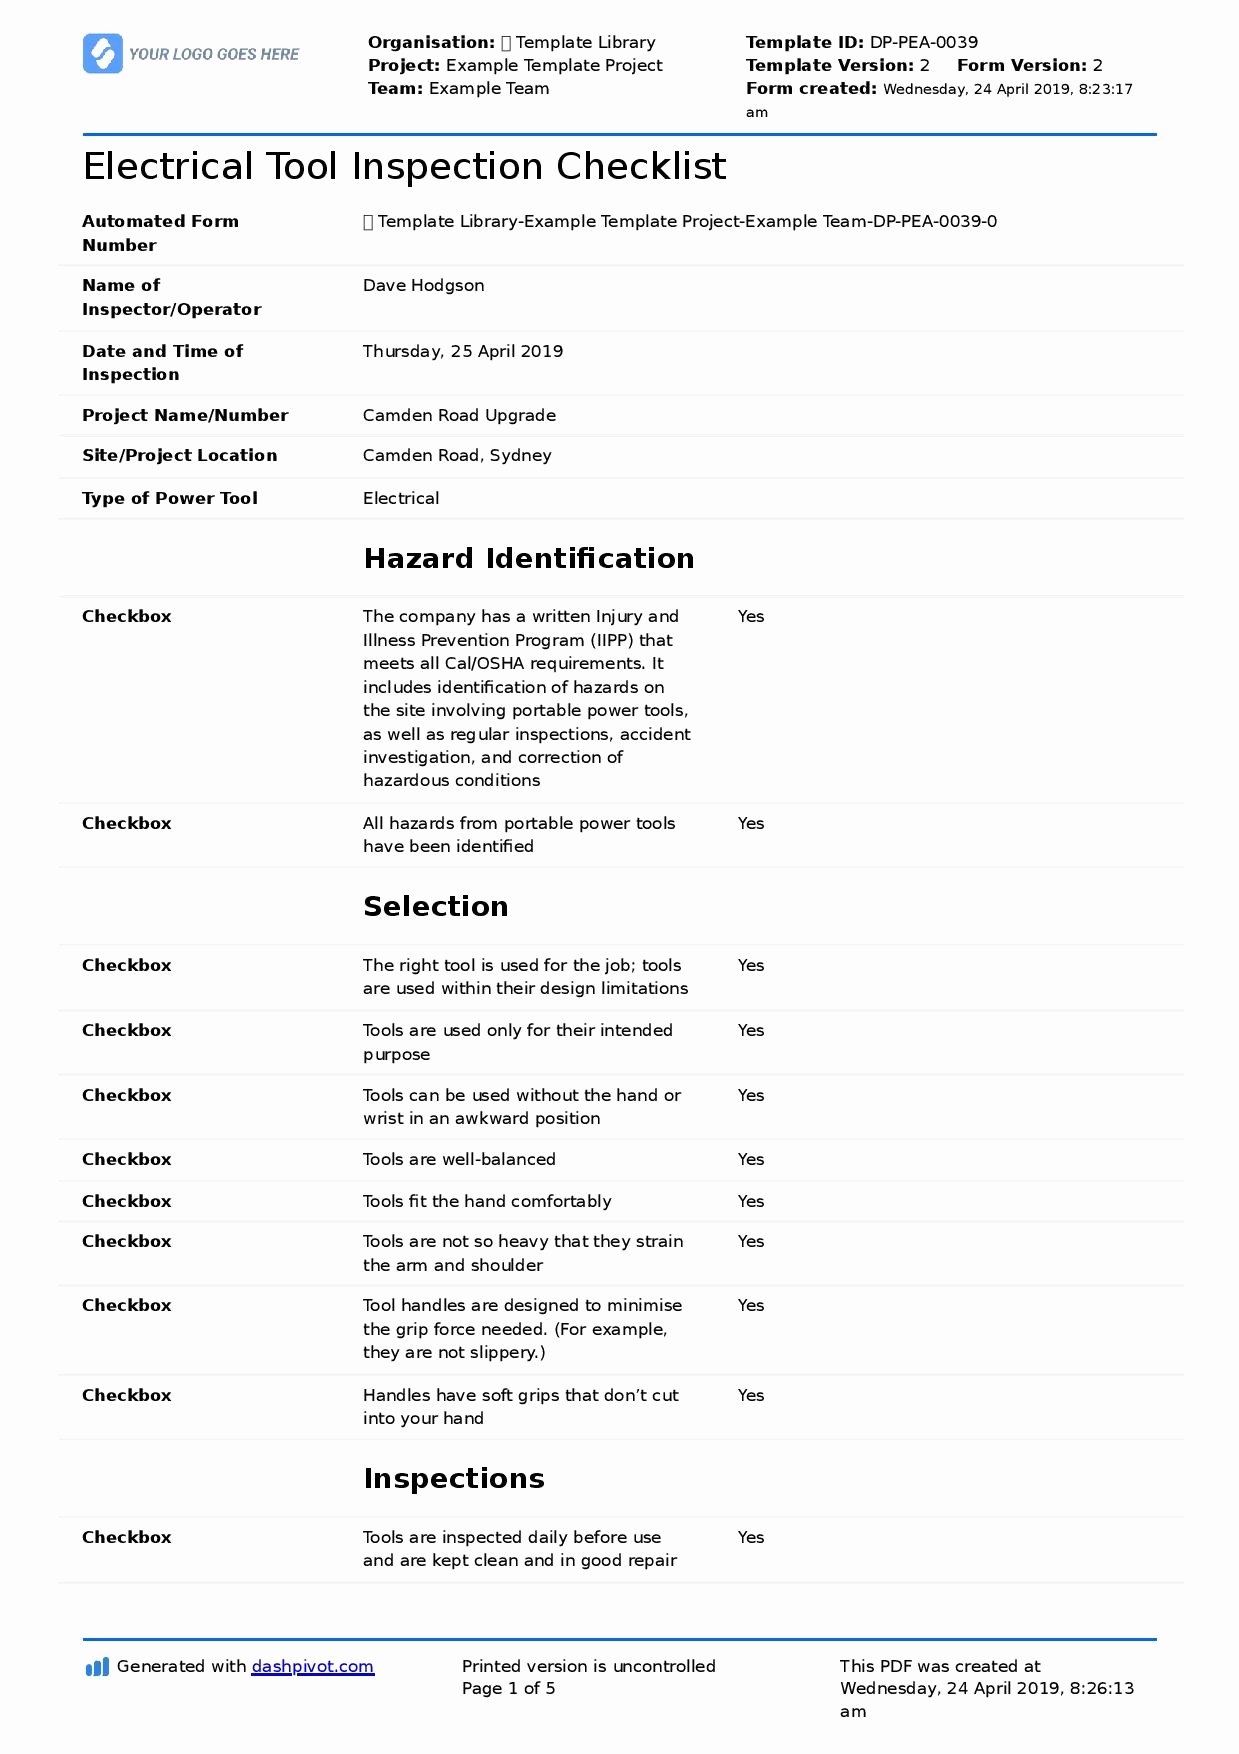 Electrical Inspection Report Template Beautiful Electrical tool Inspection Checklist Free to Use and Customisable